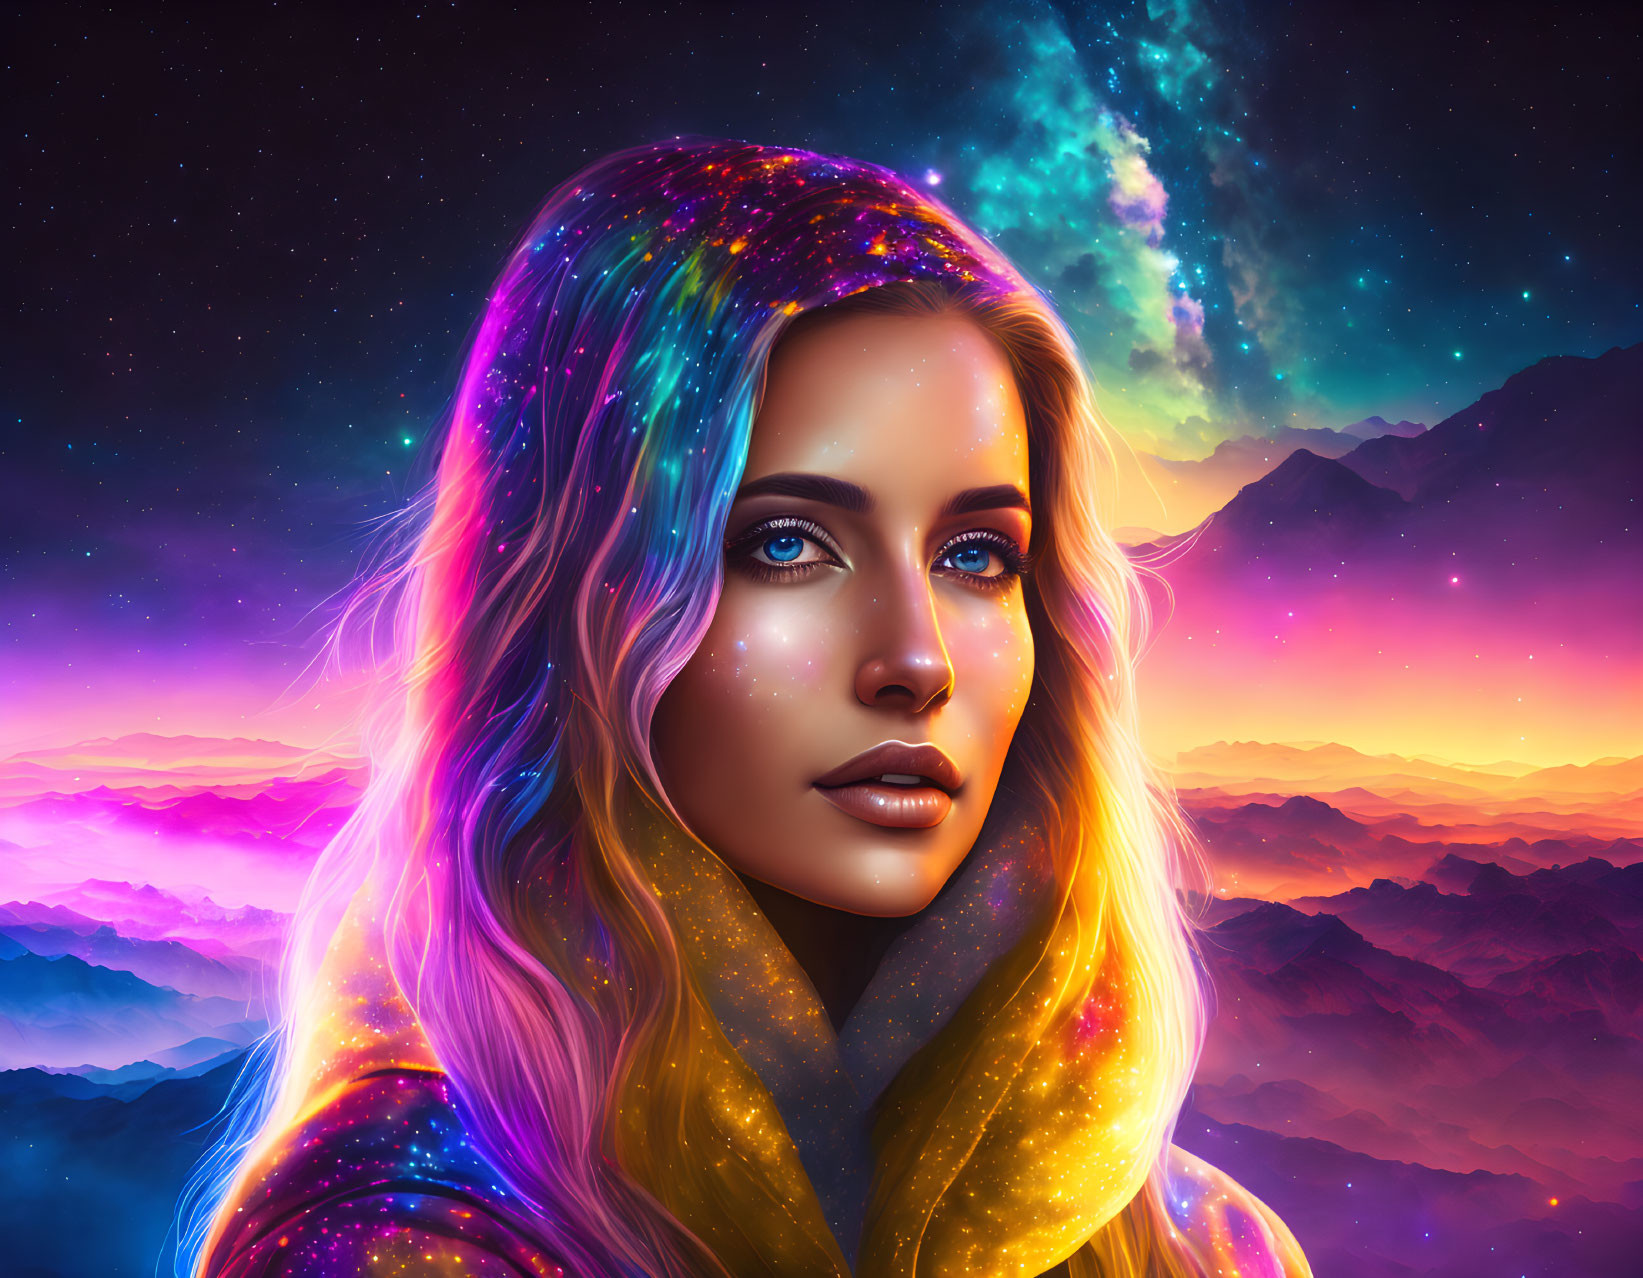 Colorful woman with galaxy hair in cosmic landscape